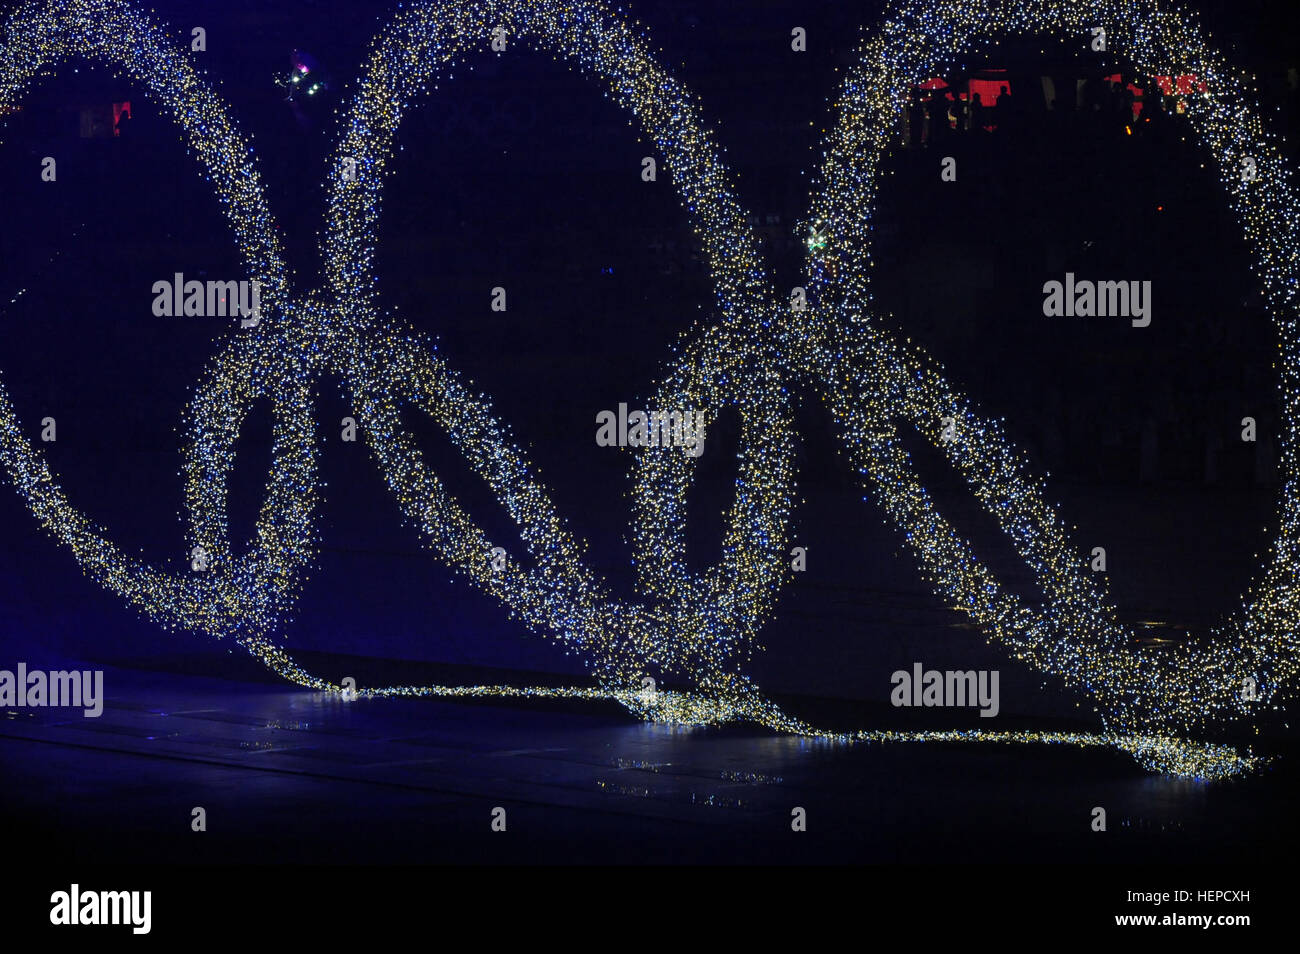 Olympic rings during 2008 Summer Olympics opening ceremony Stock Photo